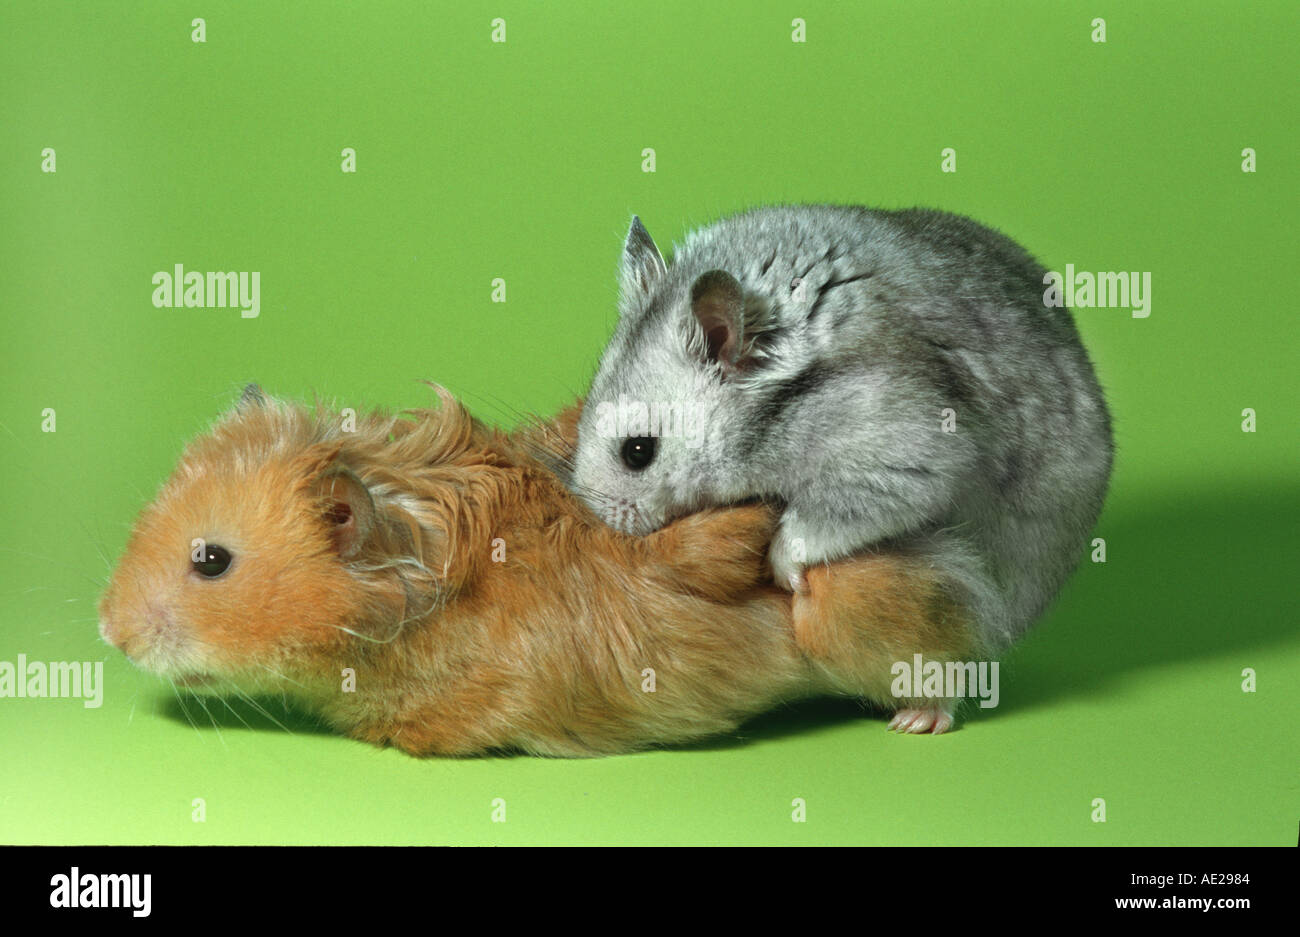 verwennen vliegtuigen iets MESOCRICETUS hamster MATING Couple SERIES pic 1 of 3 Serie hamster in love  Stock Photo - Alamy